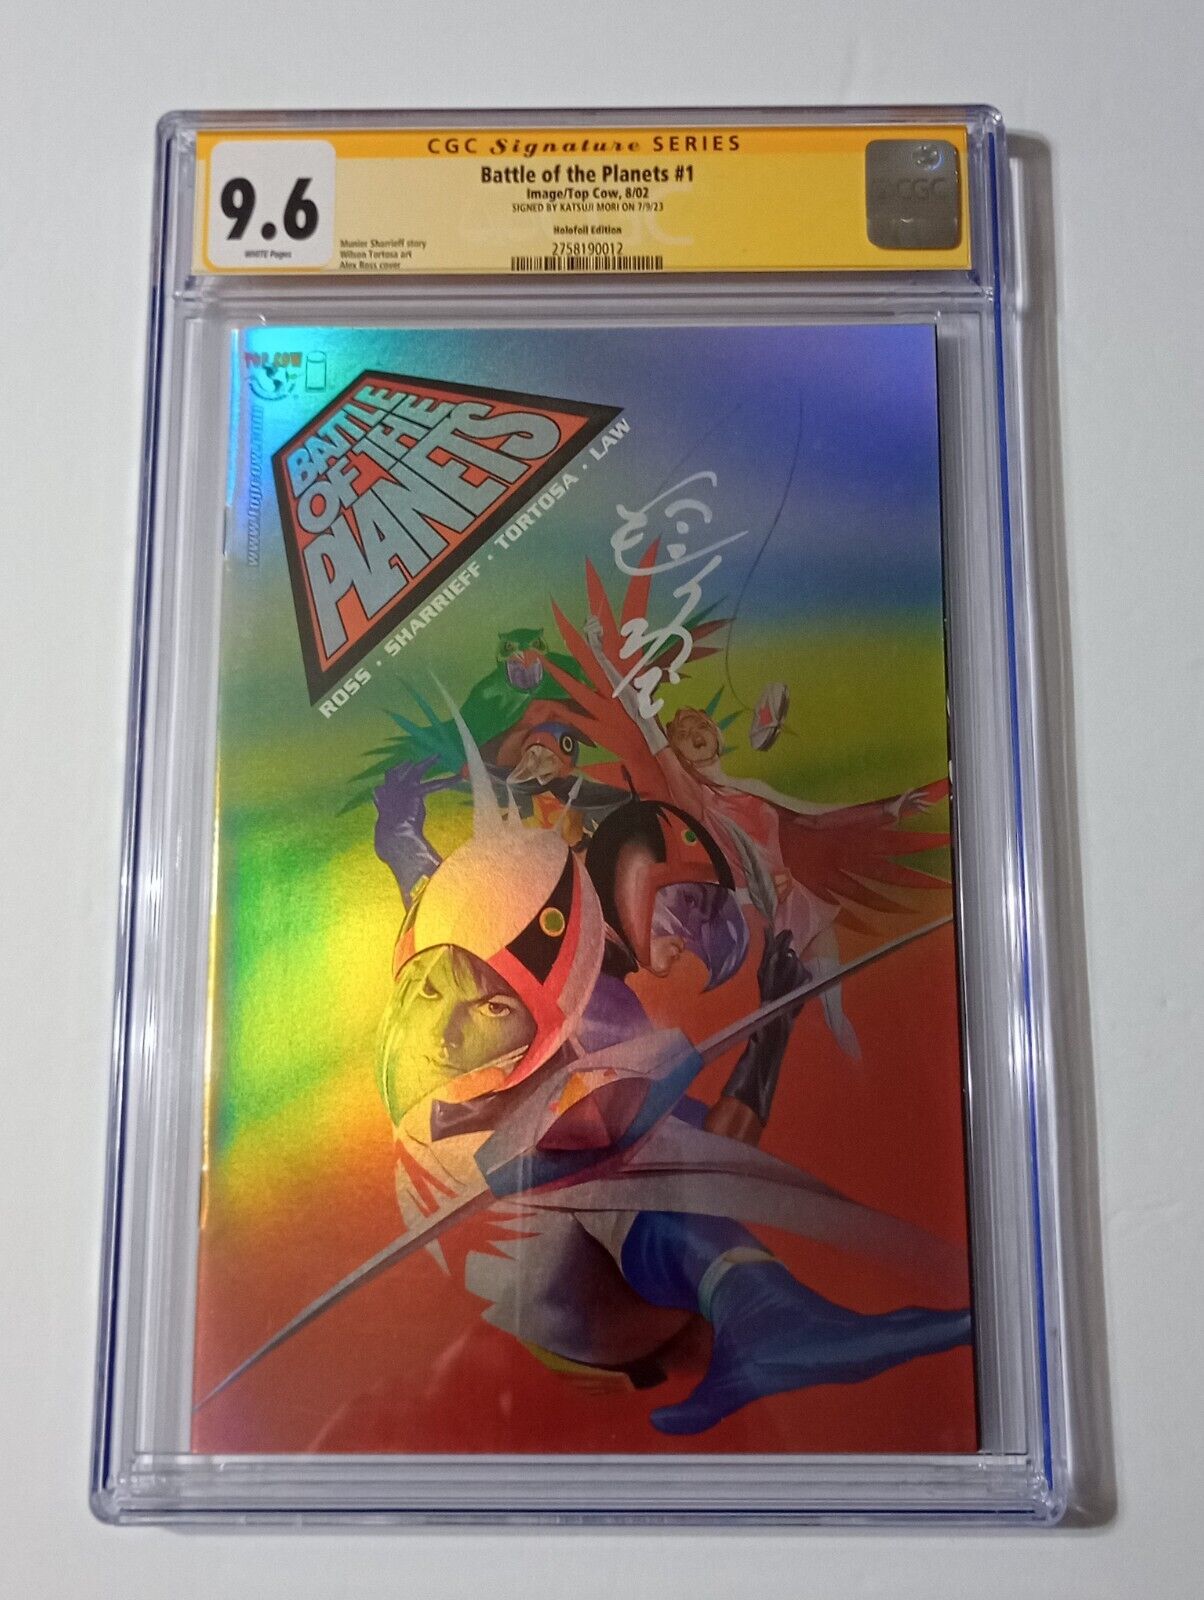 Battle of the Planets #1 CGC SS 9.6 Holofoil signed voice actor Katsuji Mori